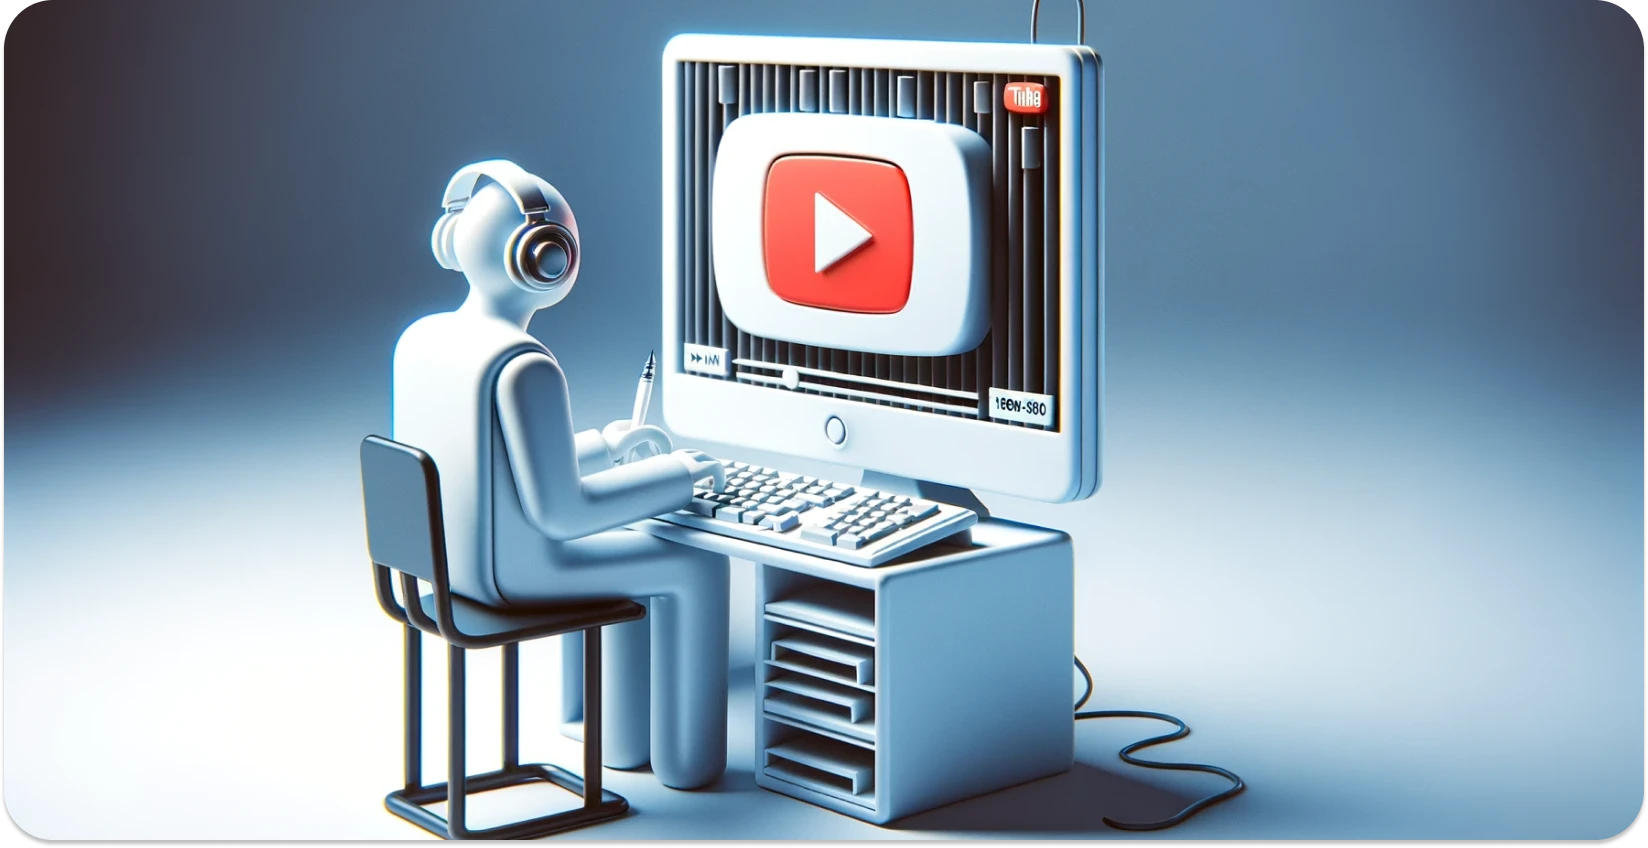 Stylized illustration of a person using a computer with the YouTube interface, focusing on transcription.